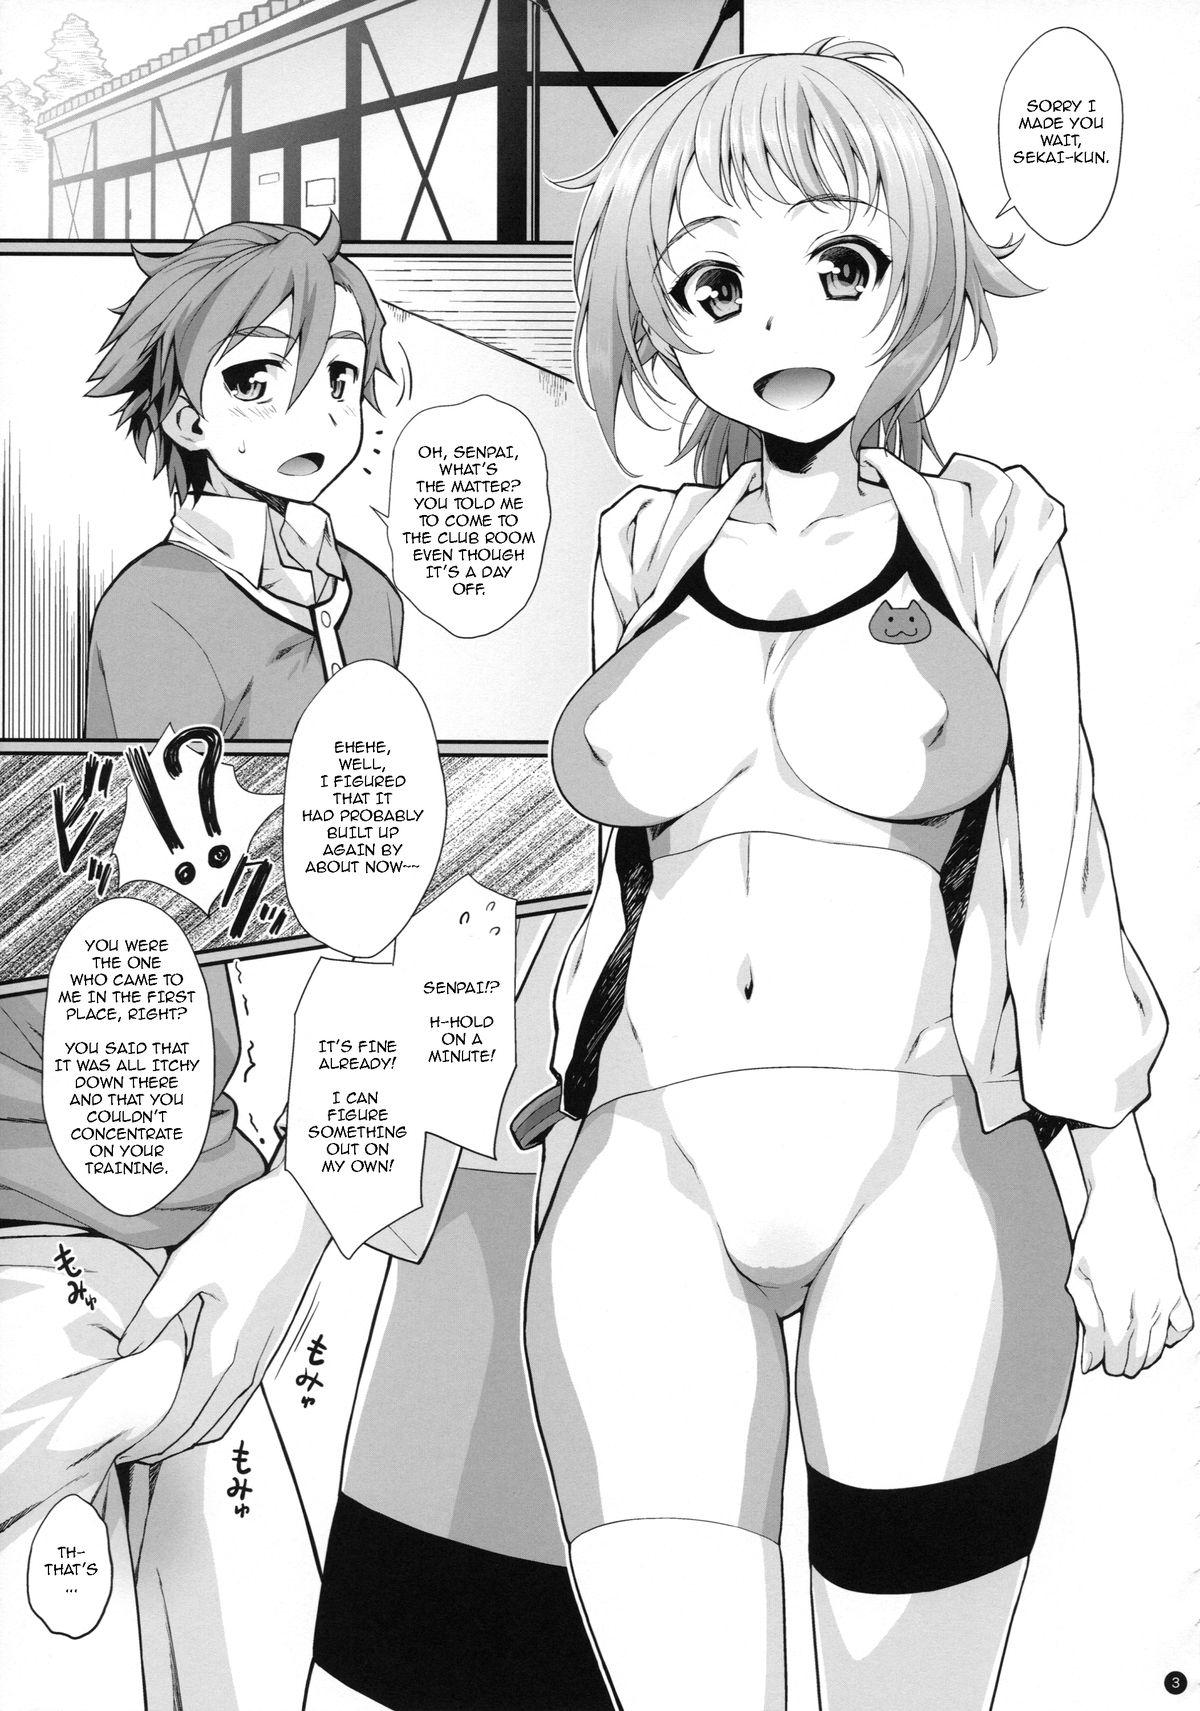 Pounded TRY ESCALATION - Gundam build fighters try Fantasy Massage - Page 5